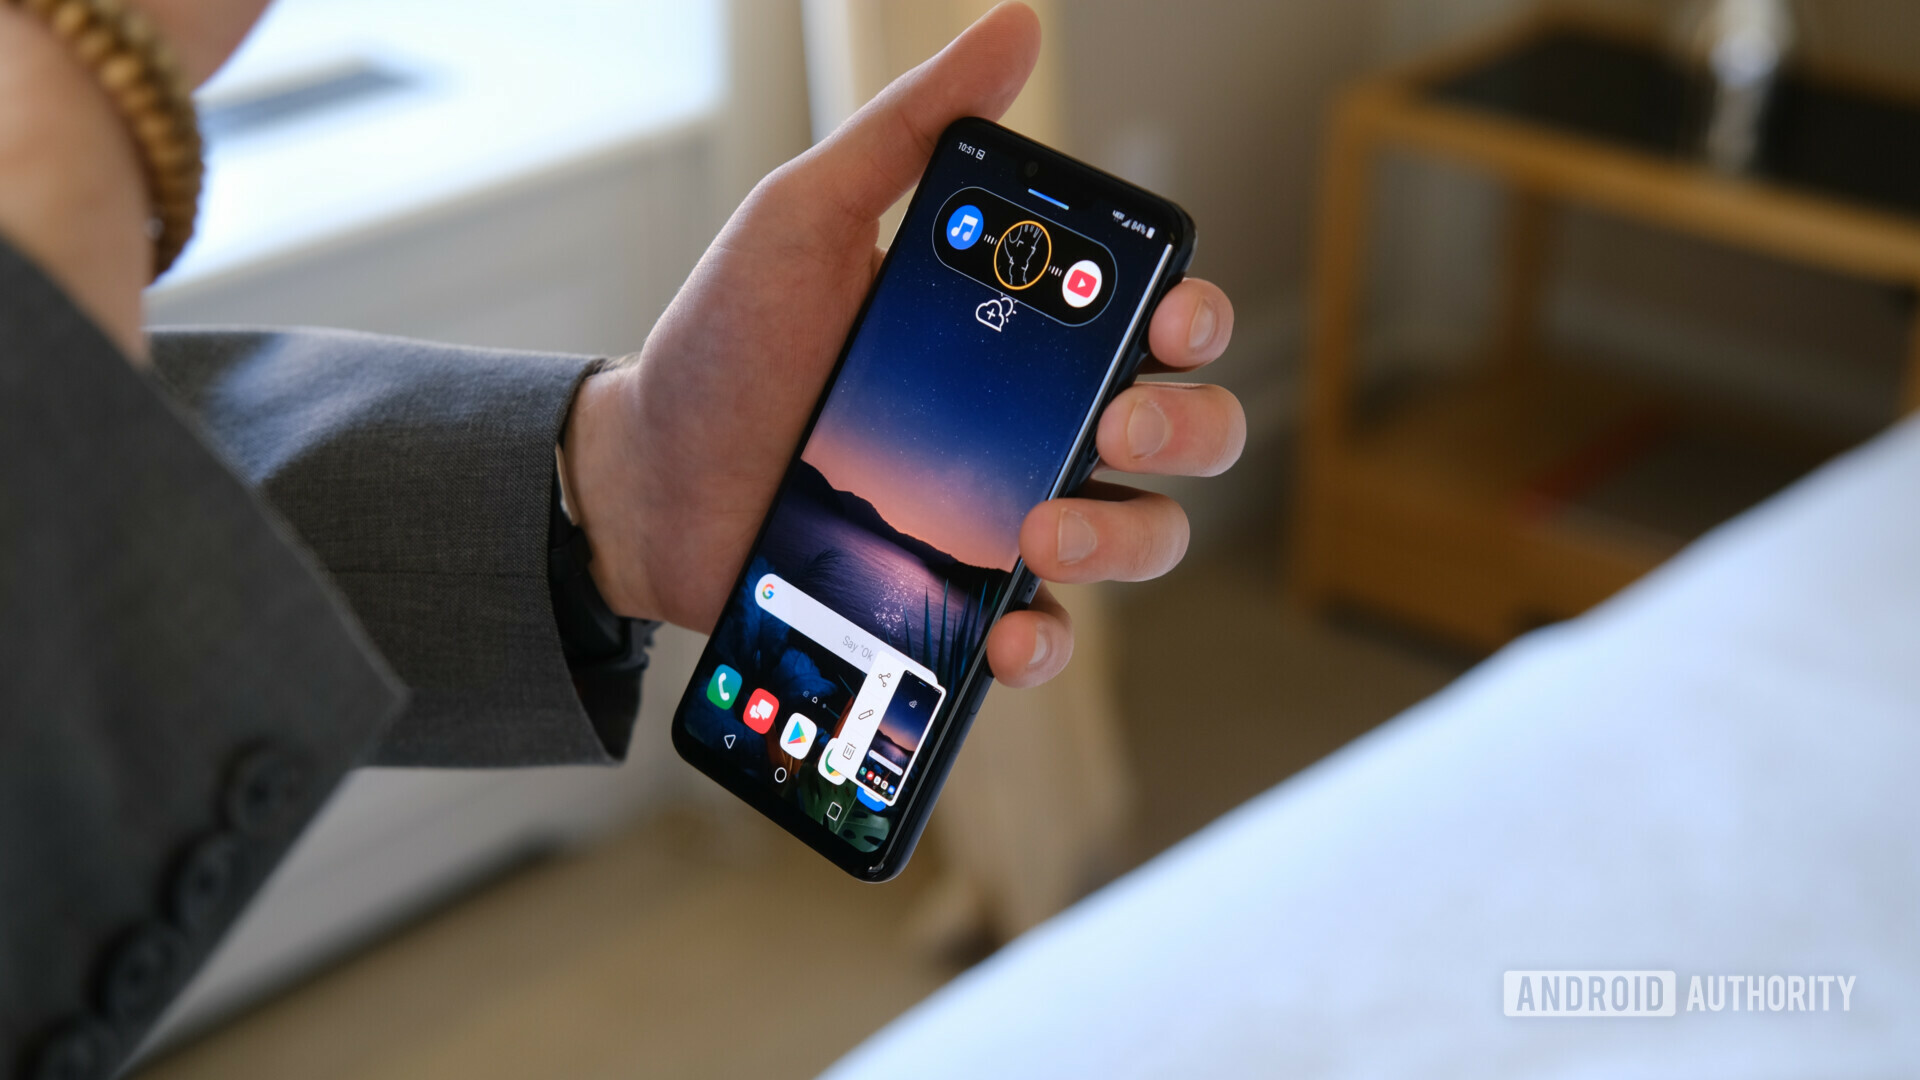 LG G8 ThinQ held in a hand